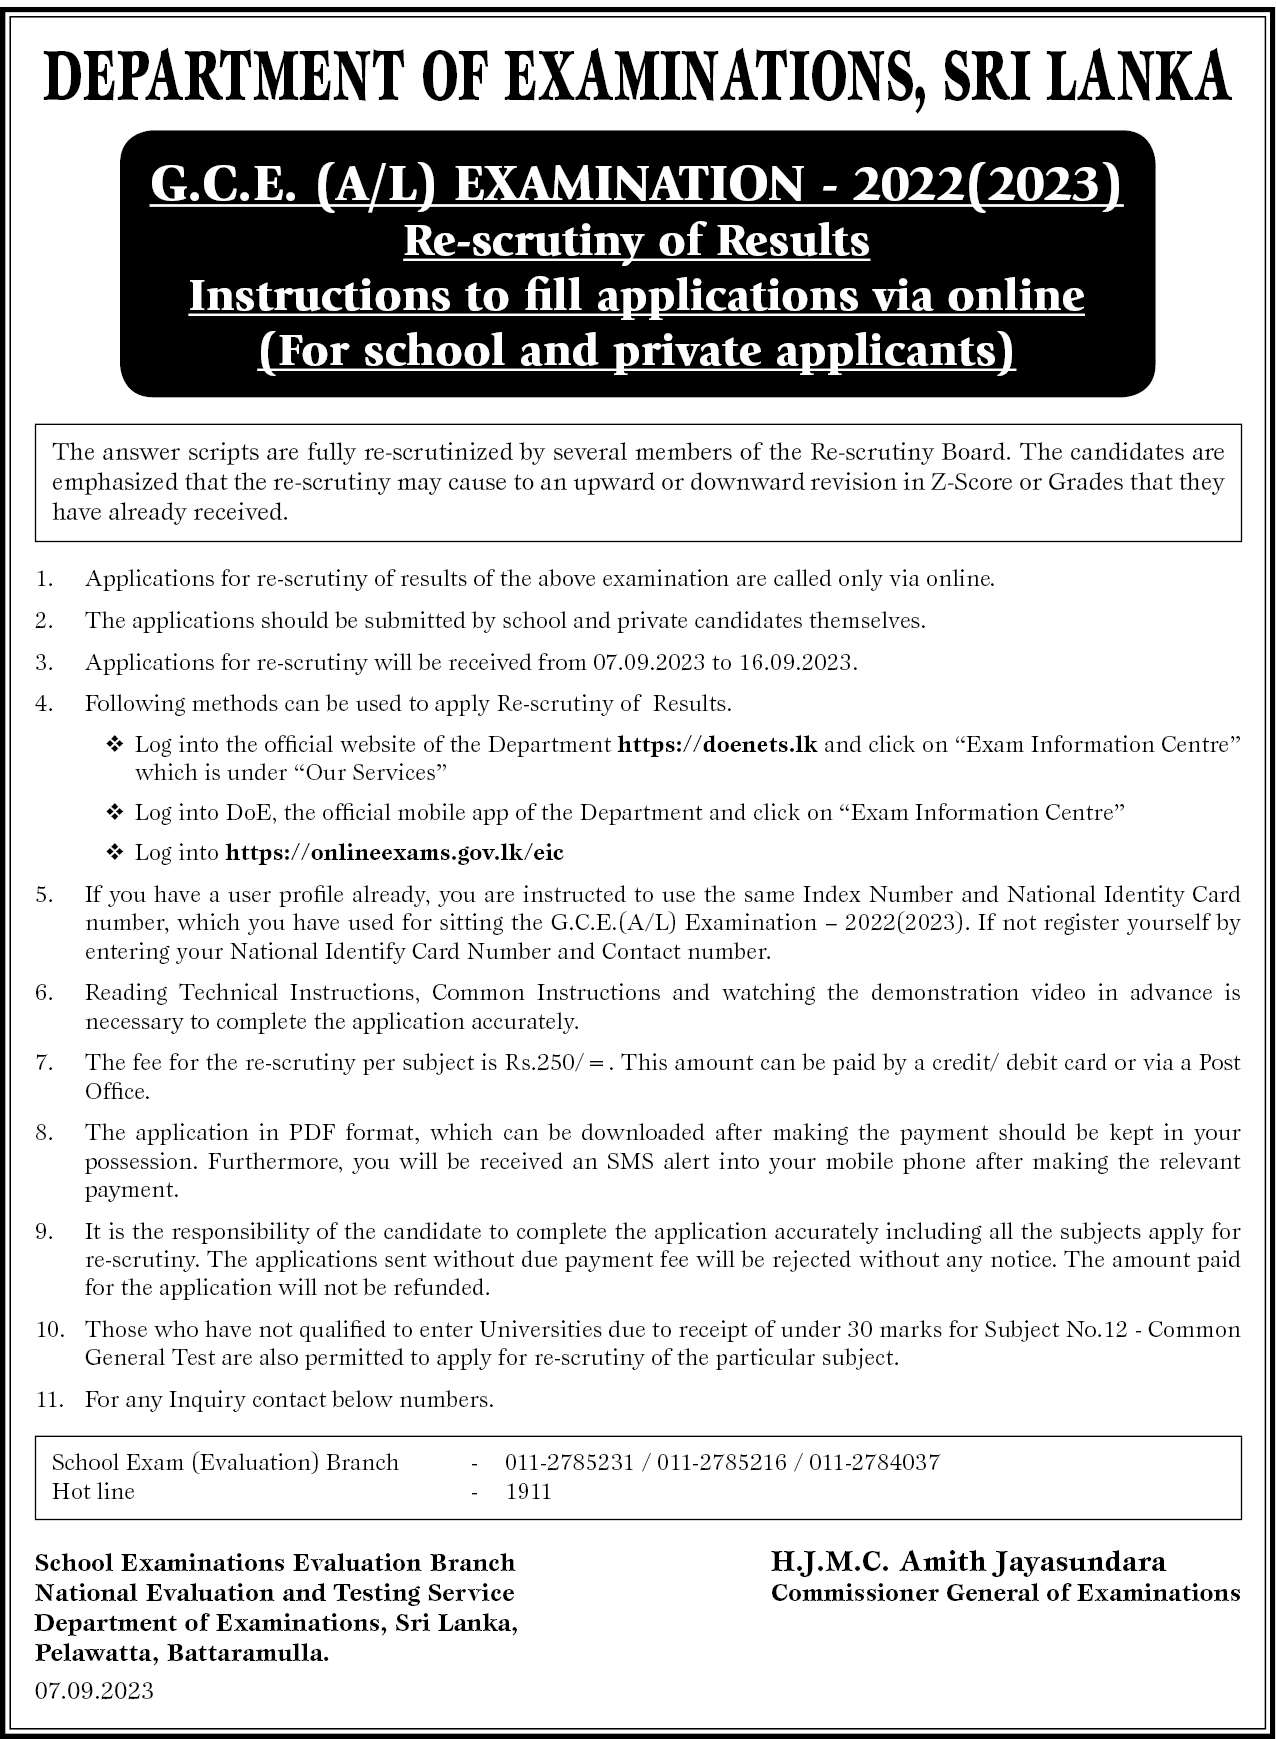 GCE A/L 2022 Re-Scrutiny of Results Online Application